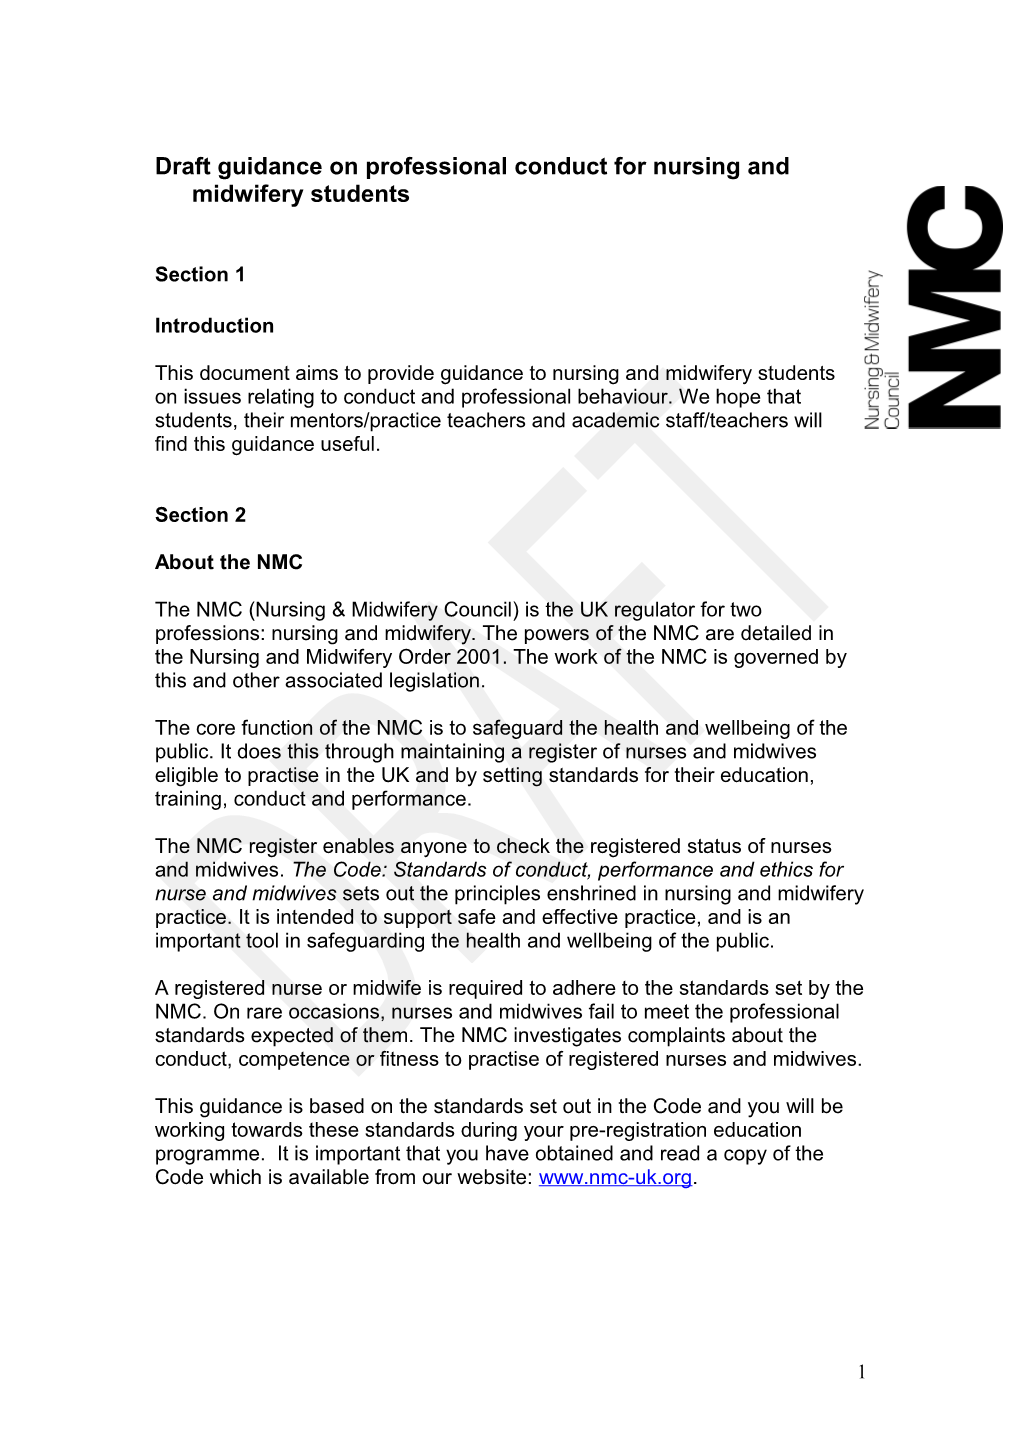 Guidance on Professional Conduct for Nursing and Midwifery Students